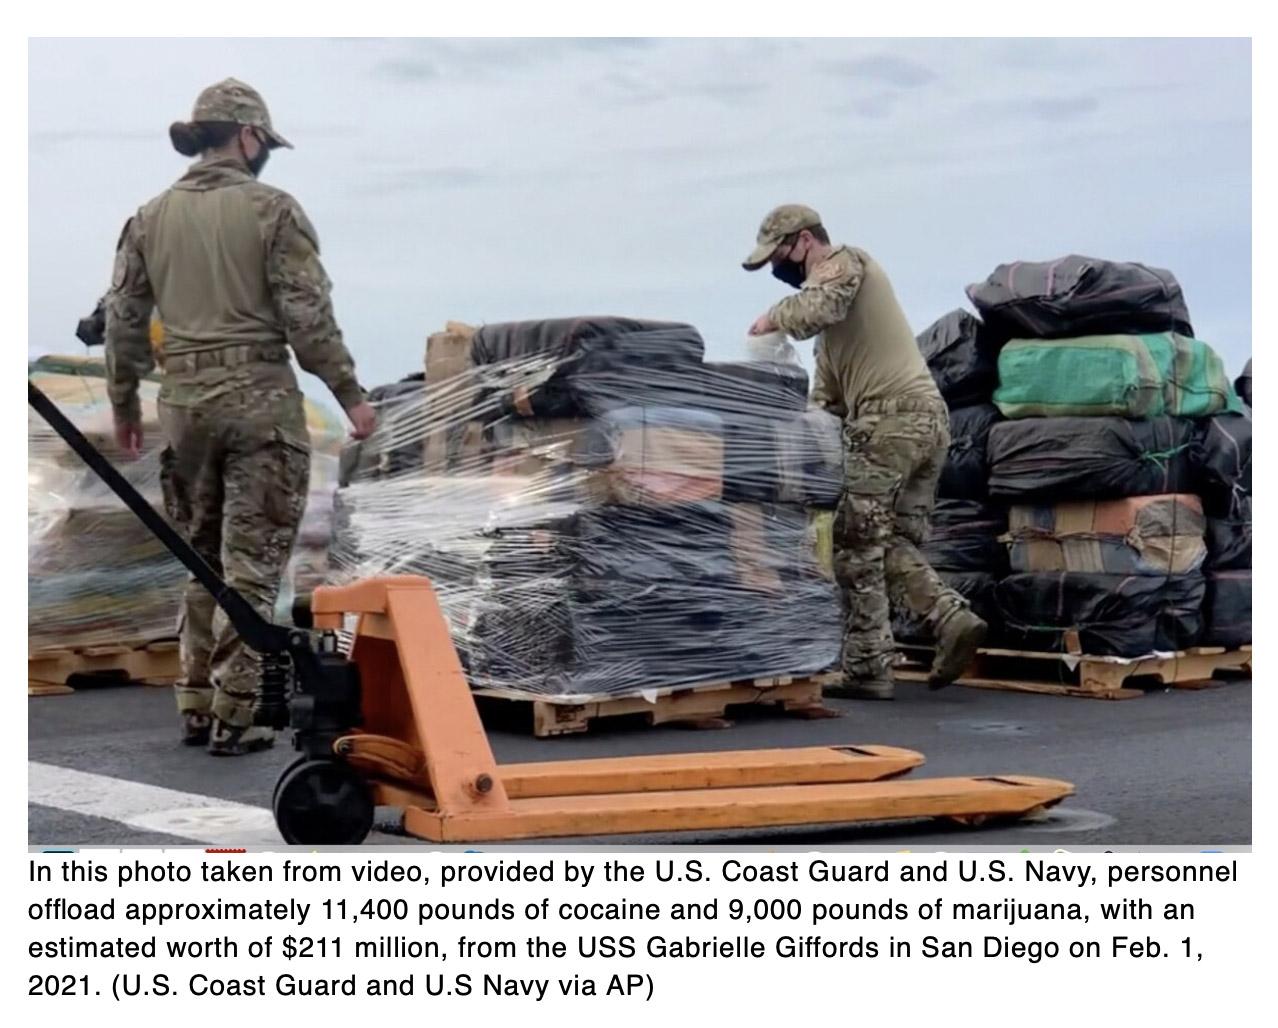  Navy, Coast Guard seized $211 million worth of drugs from Pacific smugglers